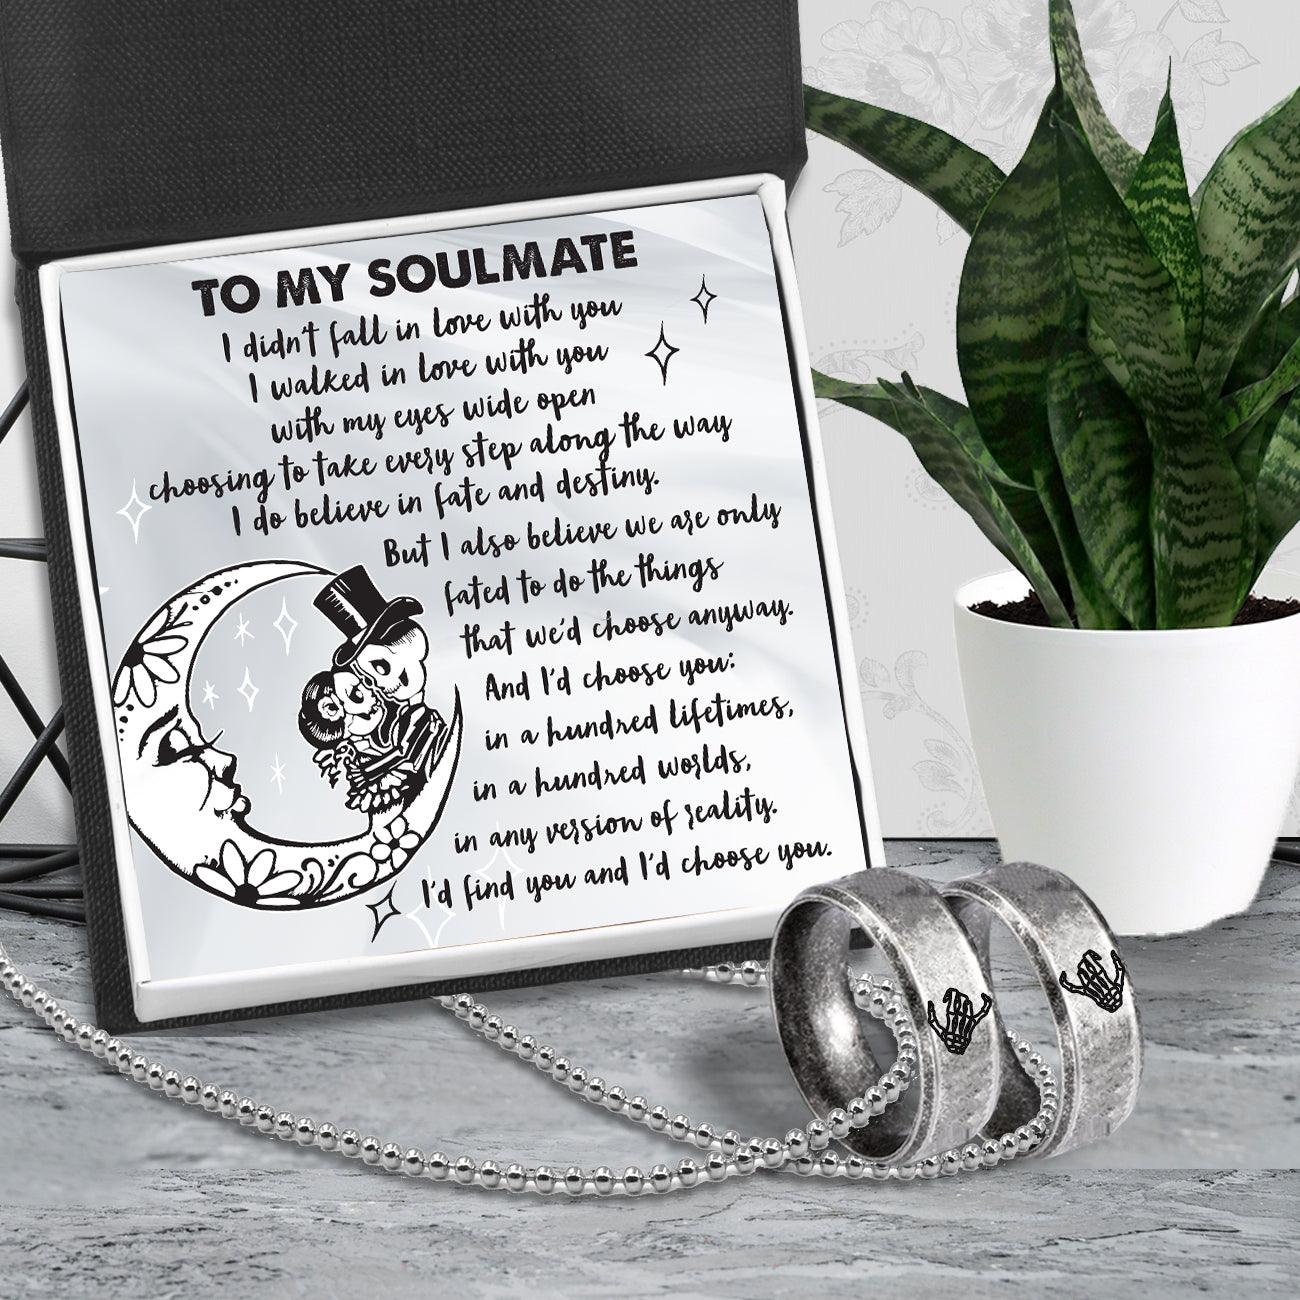 Skeleton Couple Ring Necklaces - Skull & Tatoo - To My Soulmate - I'd Choose You - Augndx26002 - Gifts Holder